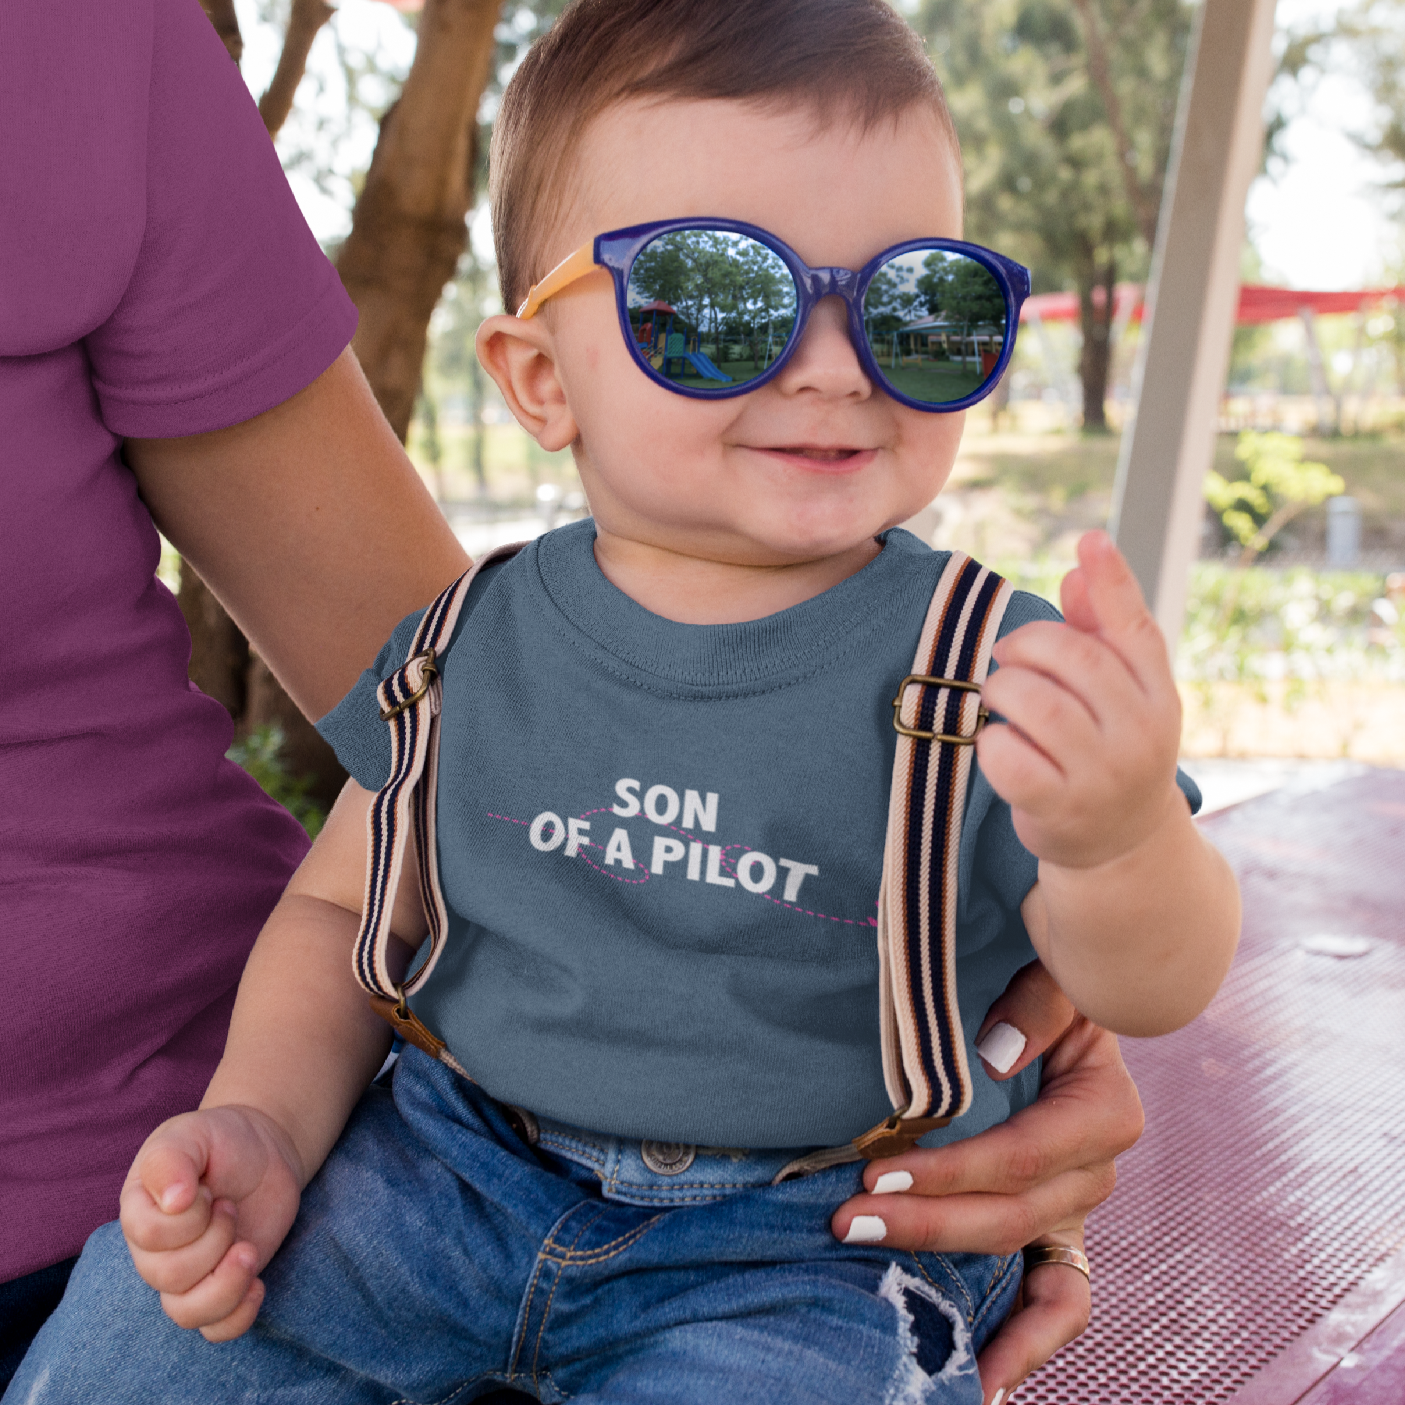 Small child with Son of a Pilot t-shirt and suspenders